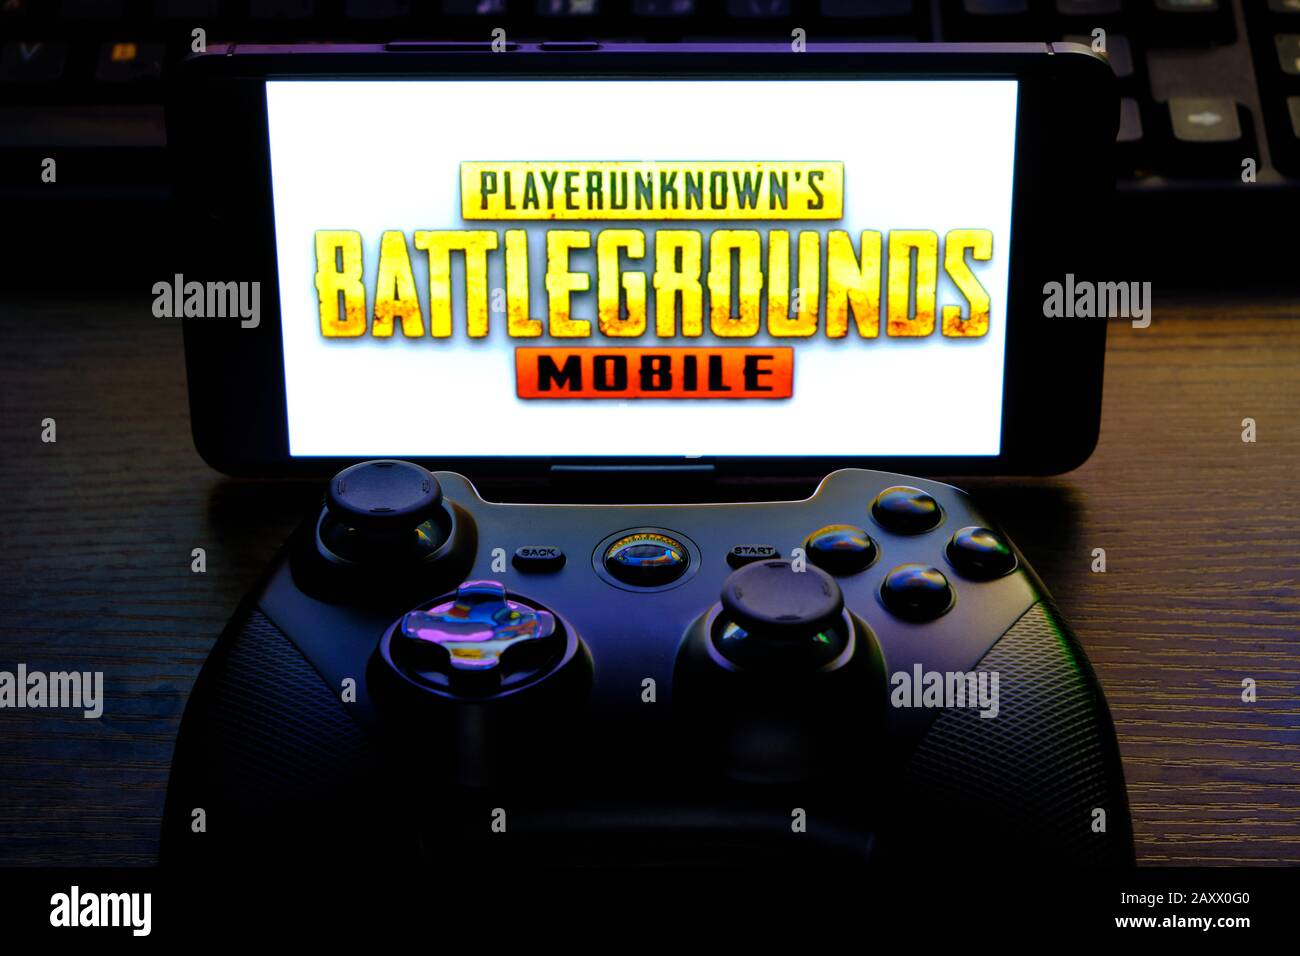 Kostanay, Kazakhstan, February 12, 2020.Joystick and mobile phone with the logo of the popular game Playerunknown's Battlegrounds abbreviated PUBG. Stock Photo